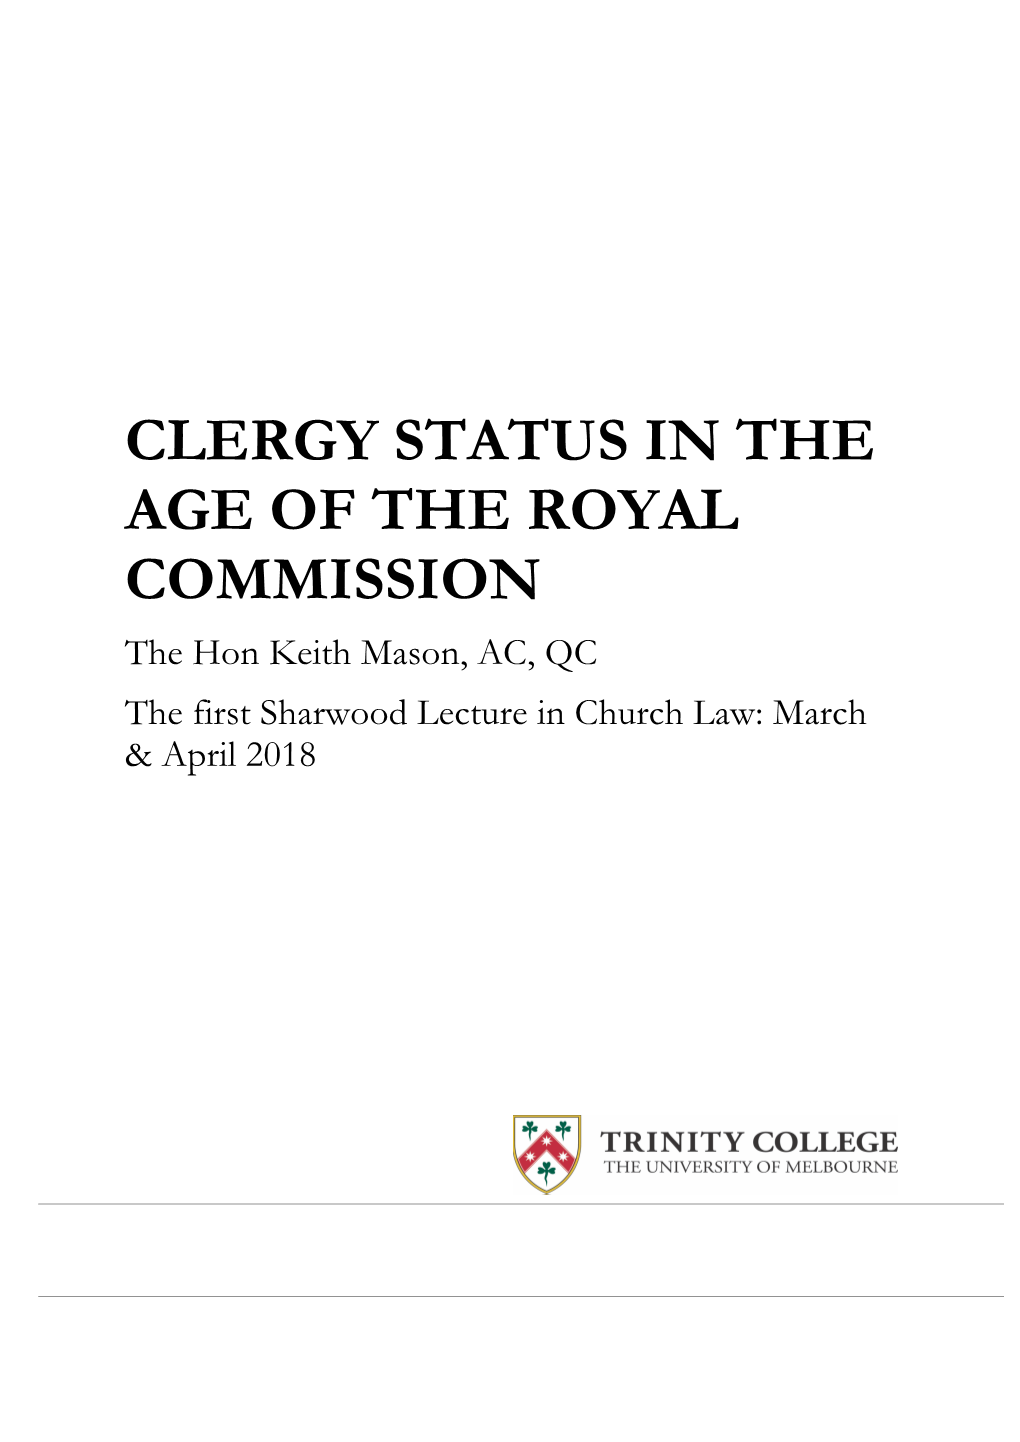 CLERGY STATUS in the AGE of the ROYAL COMMISSION the Hon Keith Mason, AC, QC the First Sharwood Lecture in Church Law: March & April 2018